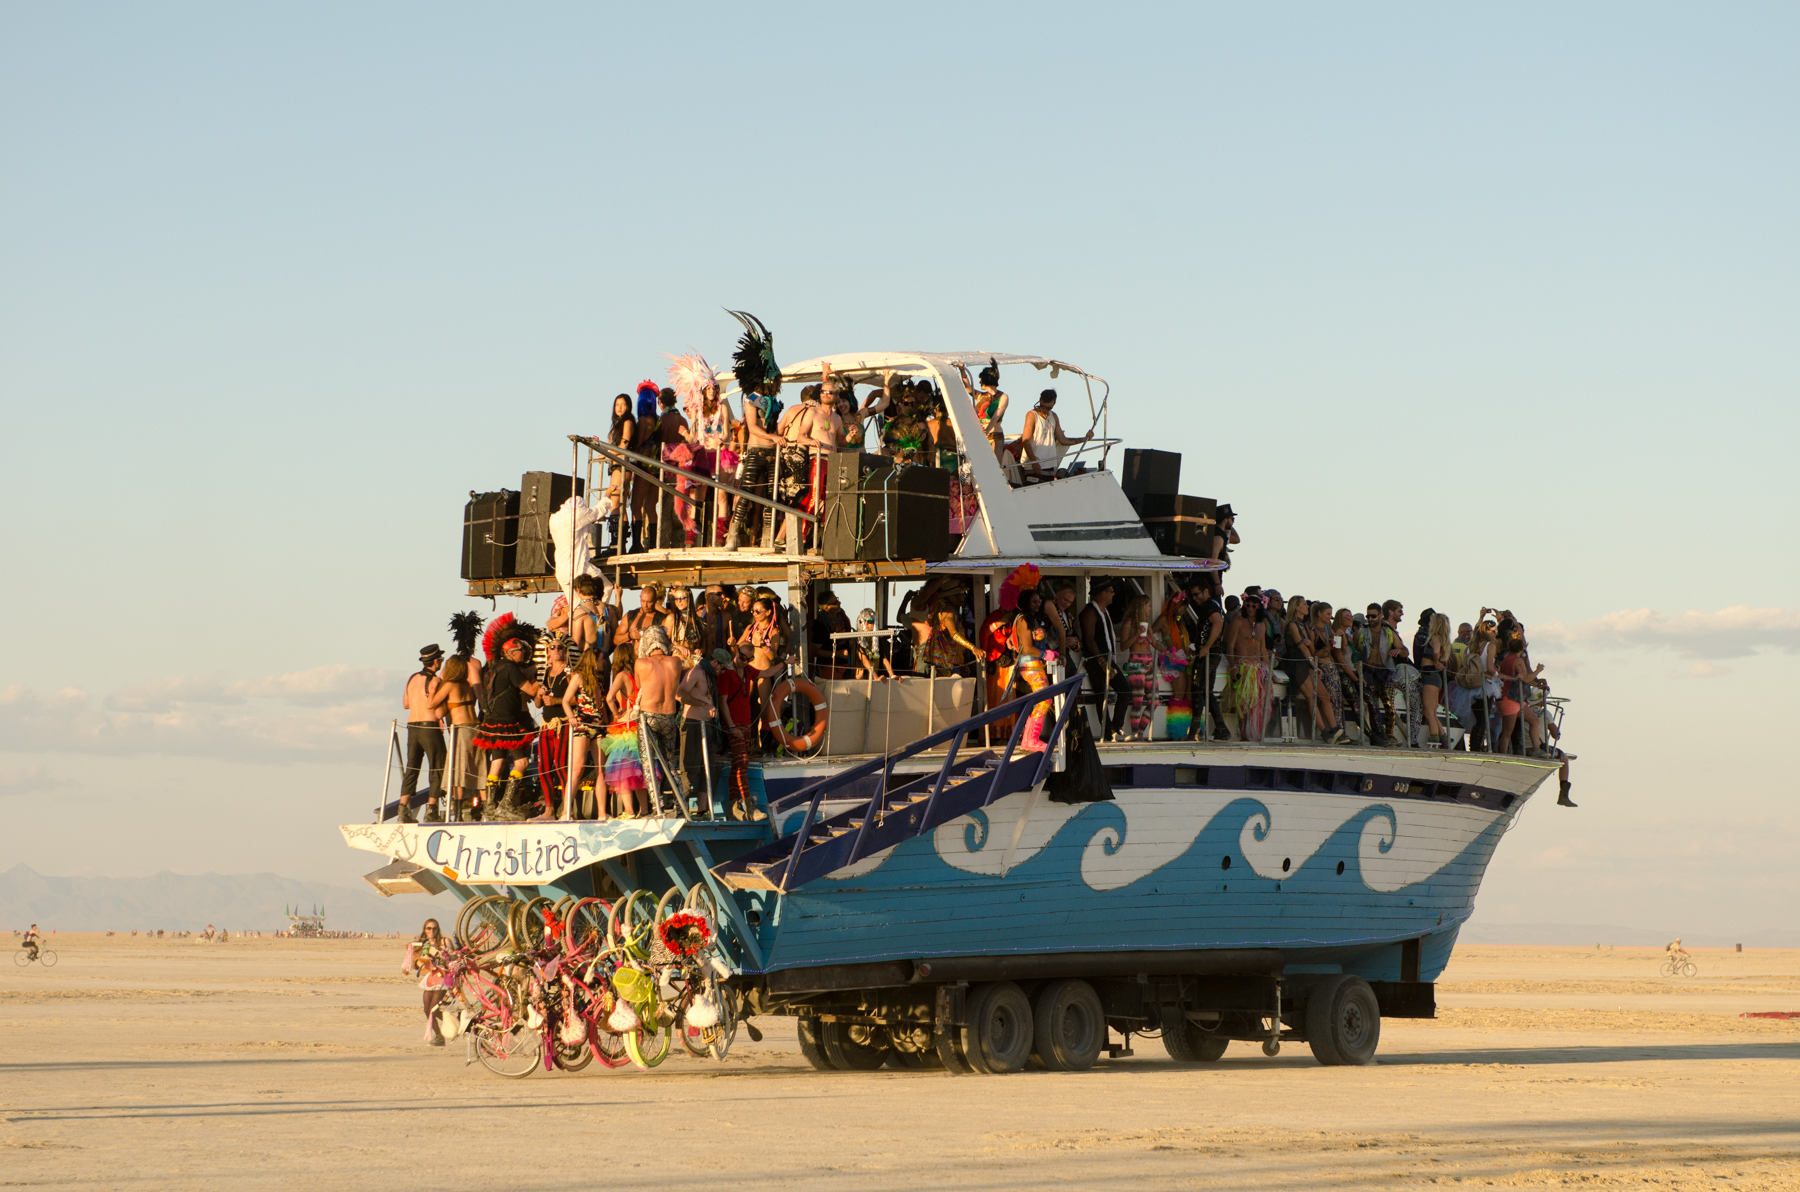 One of the many astoundingly awesome art cars that criss cross the Playa all day and all night.